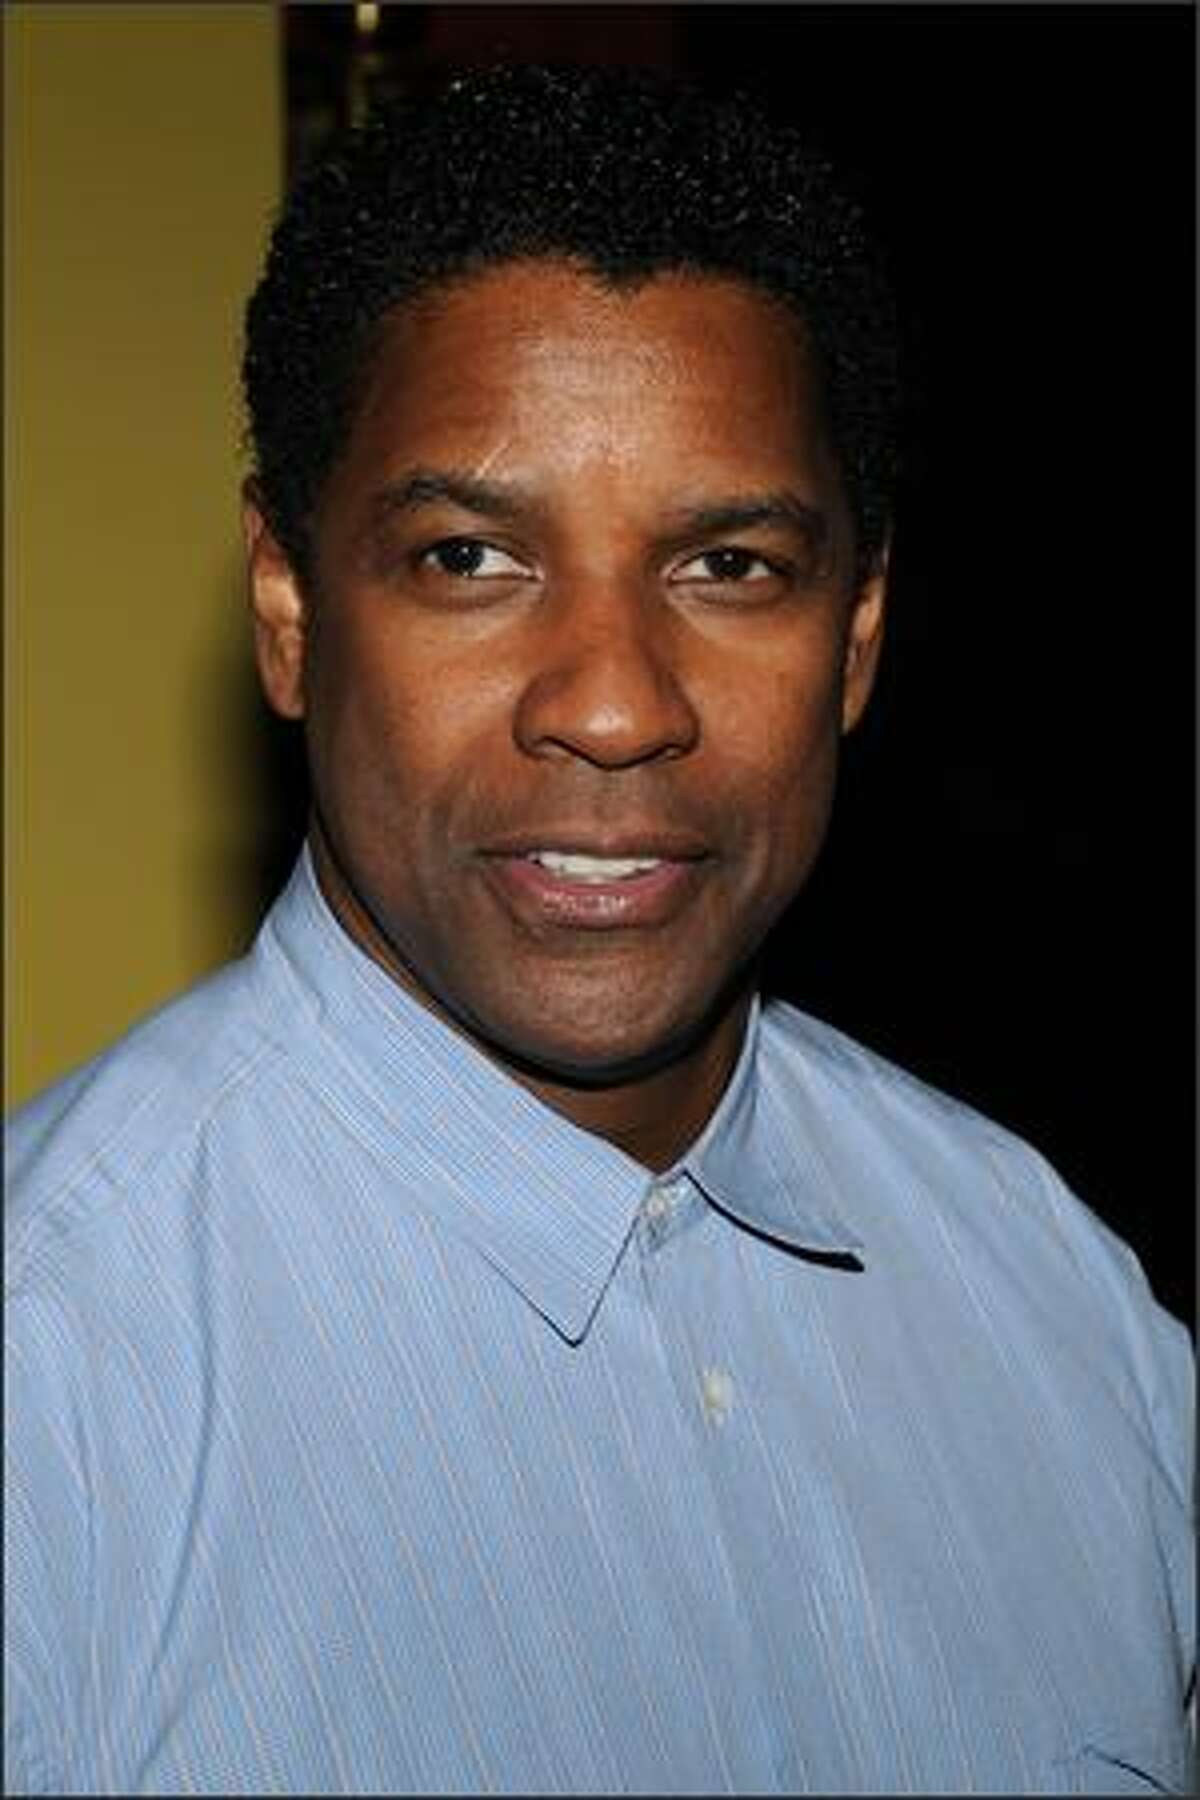 Actor Denzel Washington arrives at the premiere of "The Great Debaters" at the Ziegfeld theater on Wednesday in New York City.